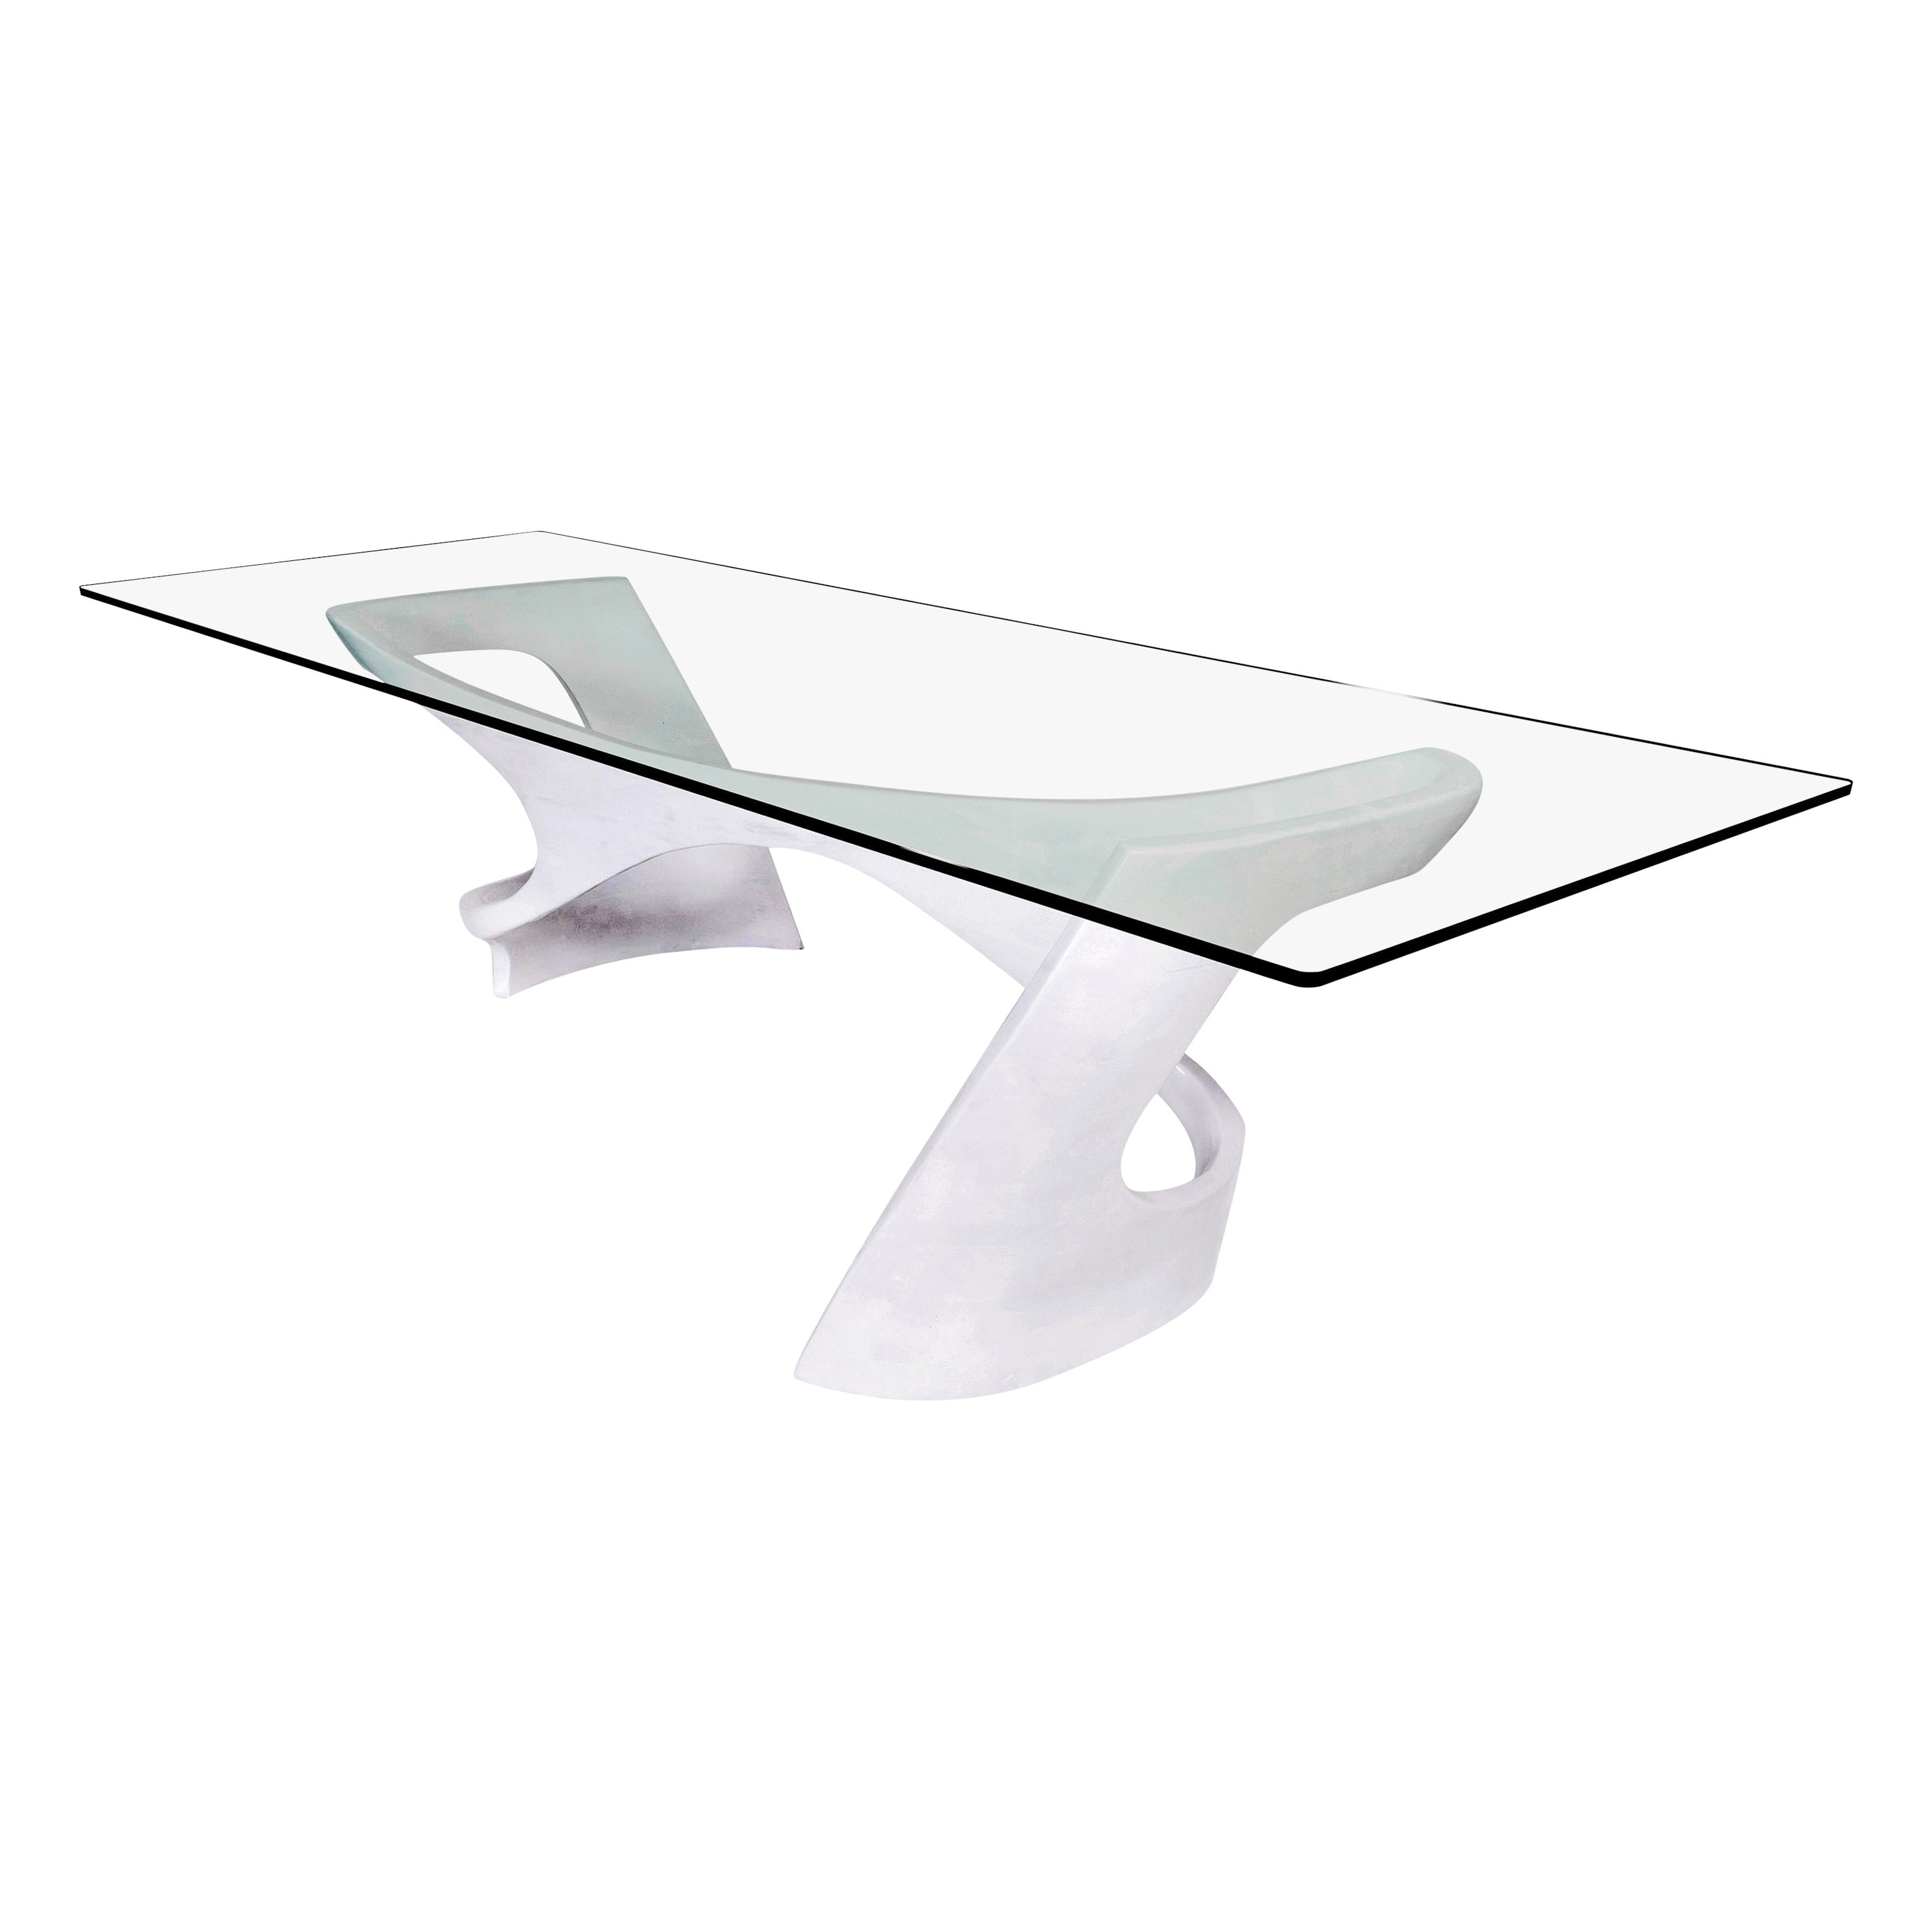 N2 Dining Table, Handcrafted Base in Solid Wood with Glass Top (floor model)